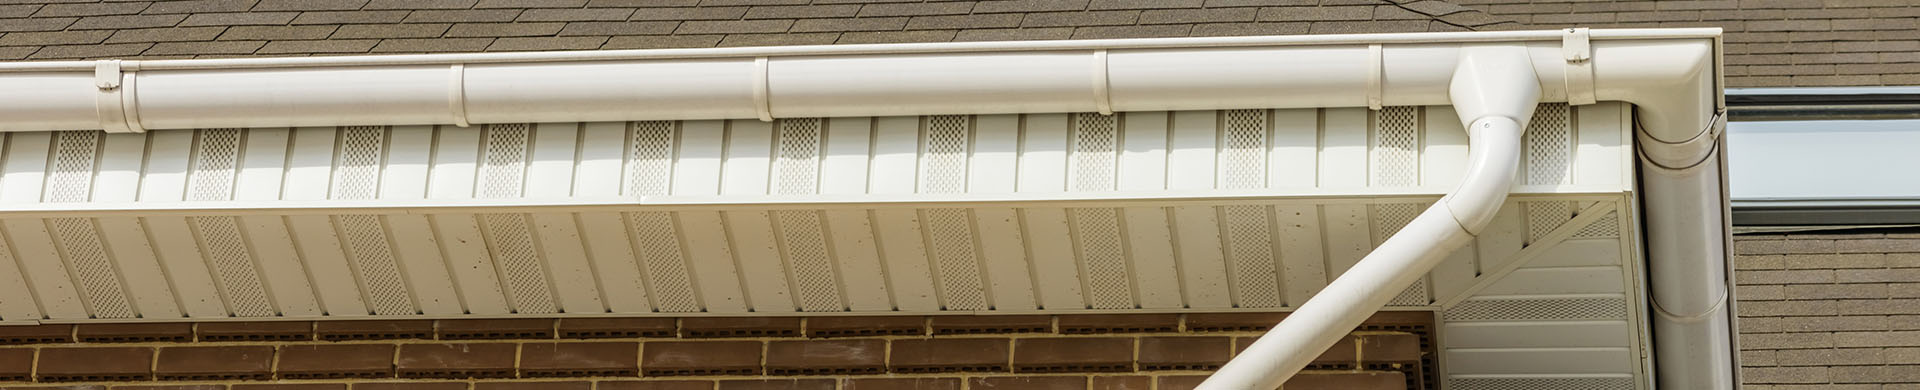 White Gutter Against Brown Roof